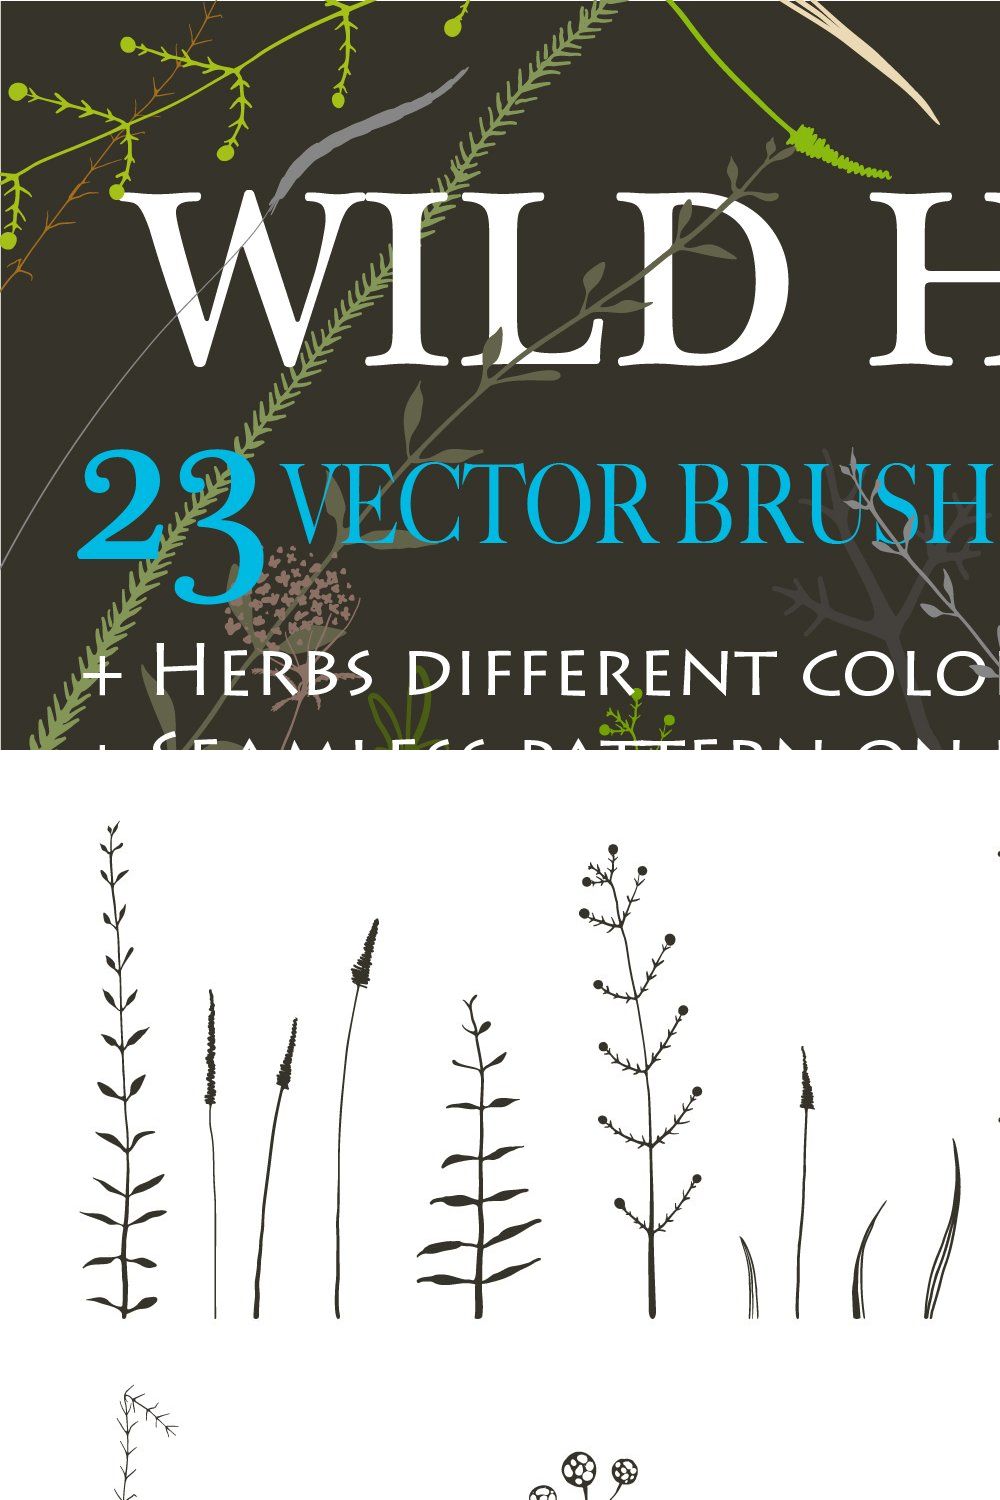 Wild Grass & Herbs vector Brushes pinterest preview image.